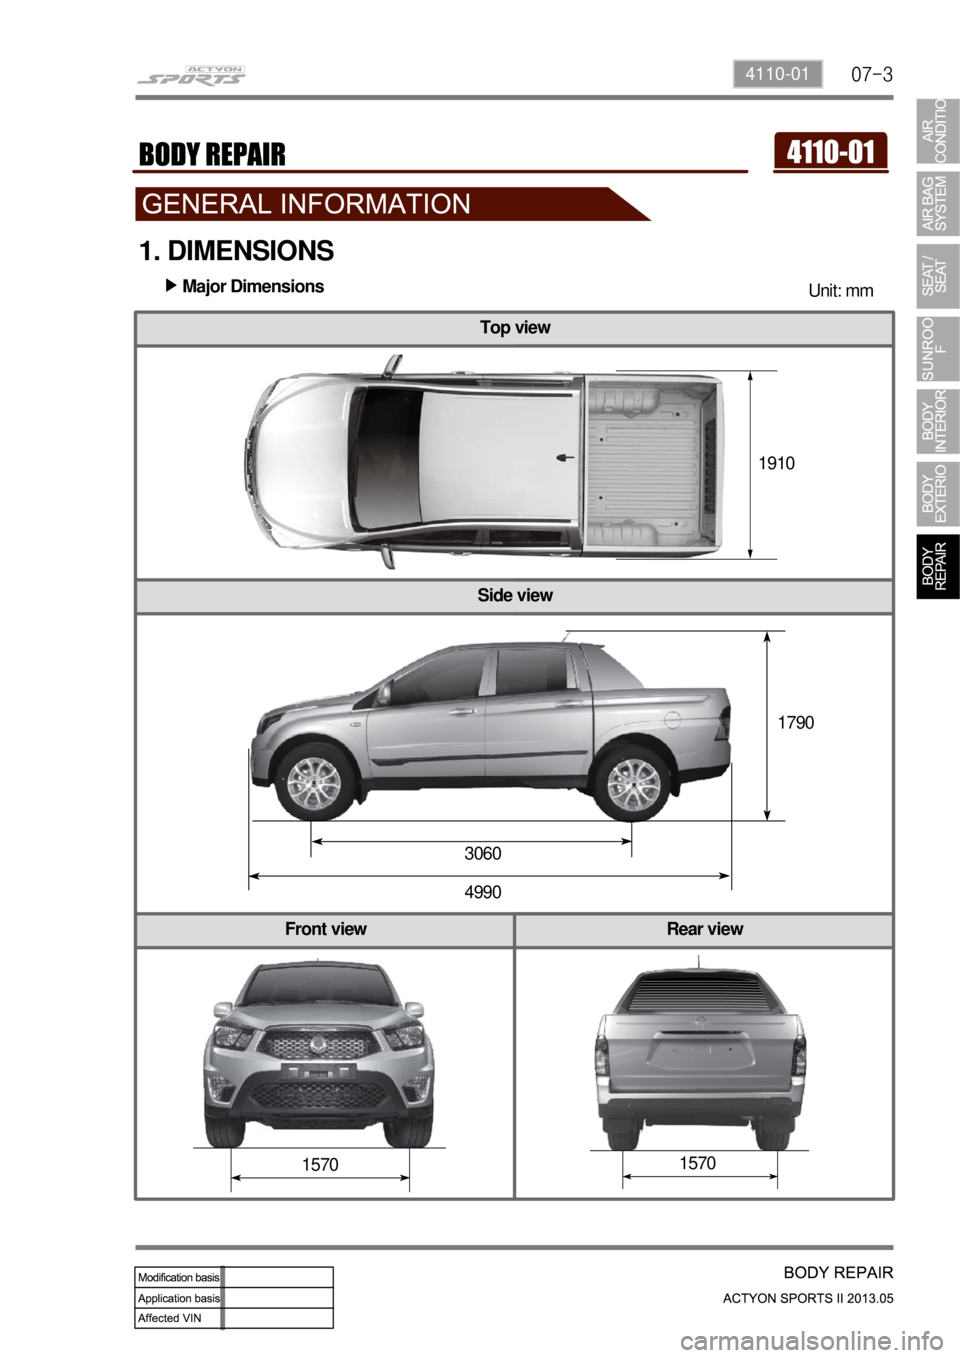 SSANGYONG NEW ACTYON SPORTS 2013  Service Manual 07-34110-01
Top view
Side view
Front view Rear view
1910 
1790 
3060 
4990
1570 
1570 
1. DIMENSIONS
Unit: mmMajor Dimensions ▶ 